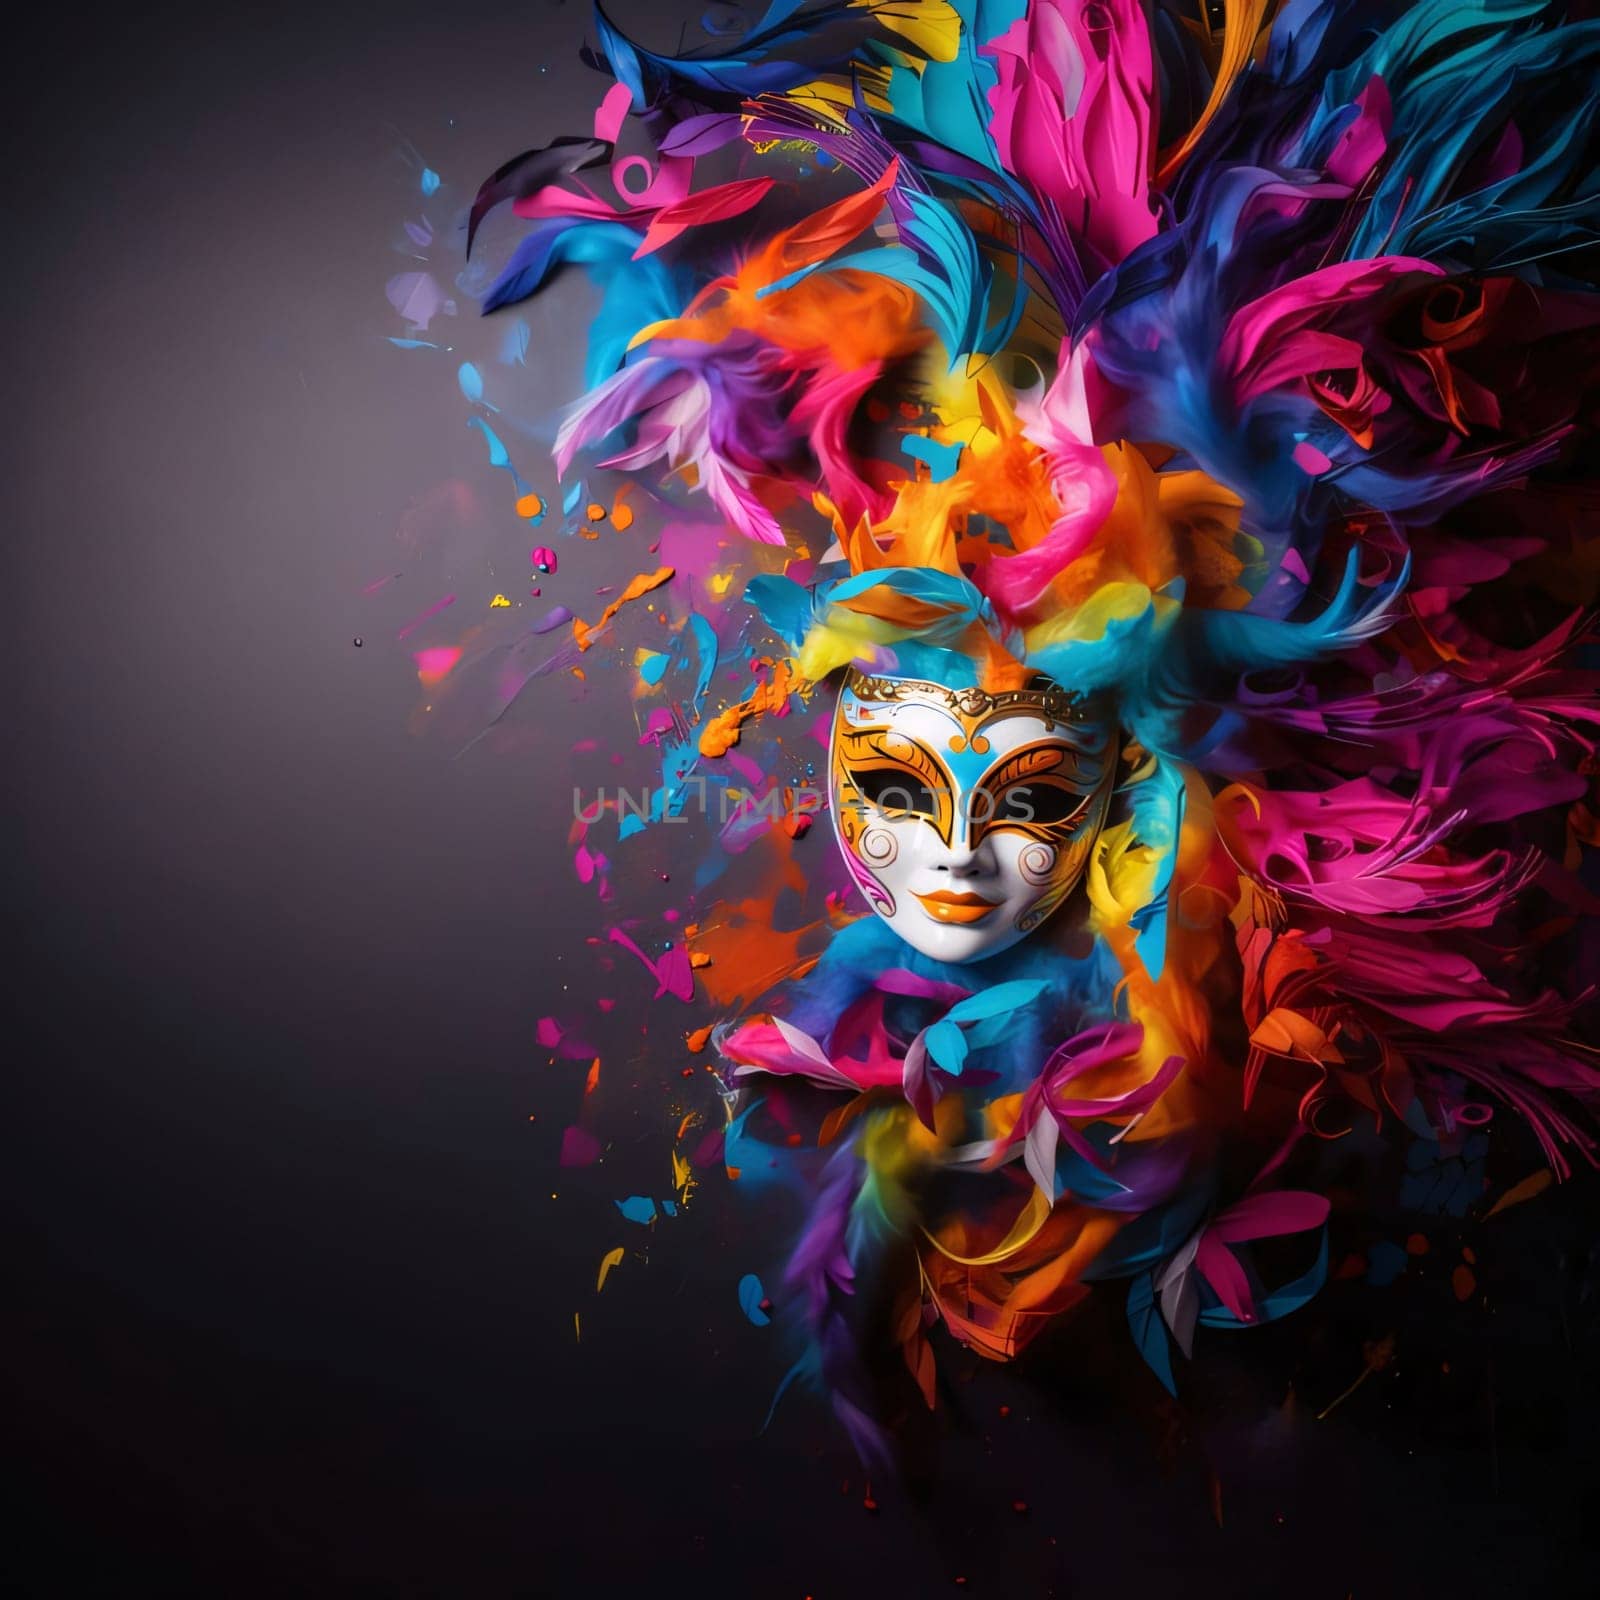 Carnival mask decorated with colorful rainbow ornaments, feathers on a dark background, to about space for your own content. Carnival outfits, masks and decorations. by ThemesS